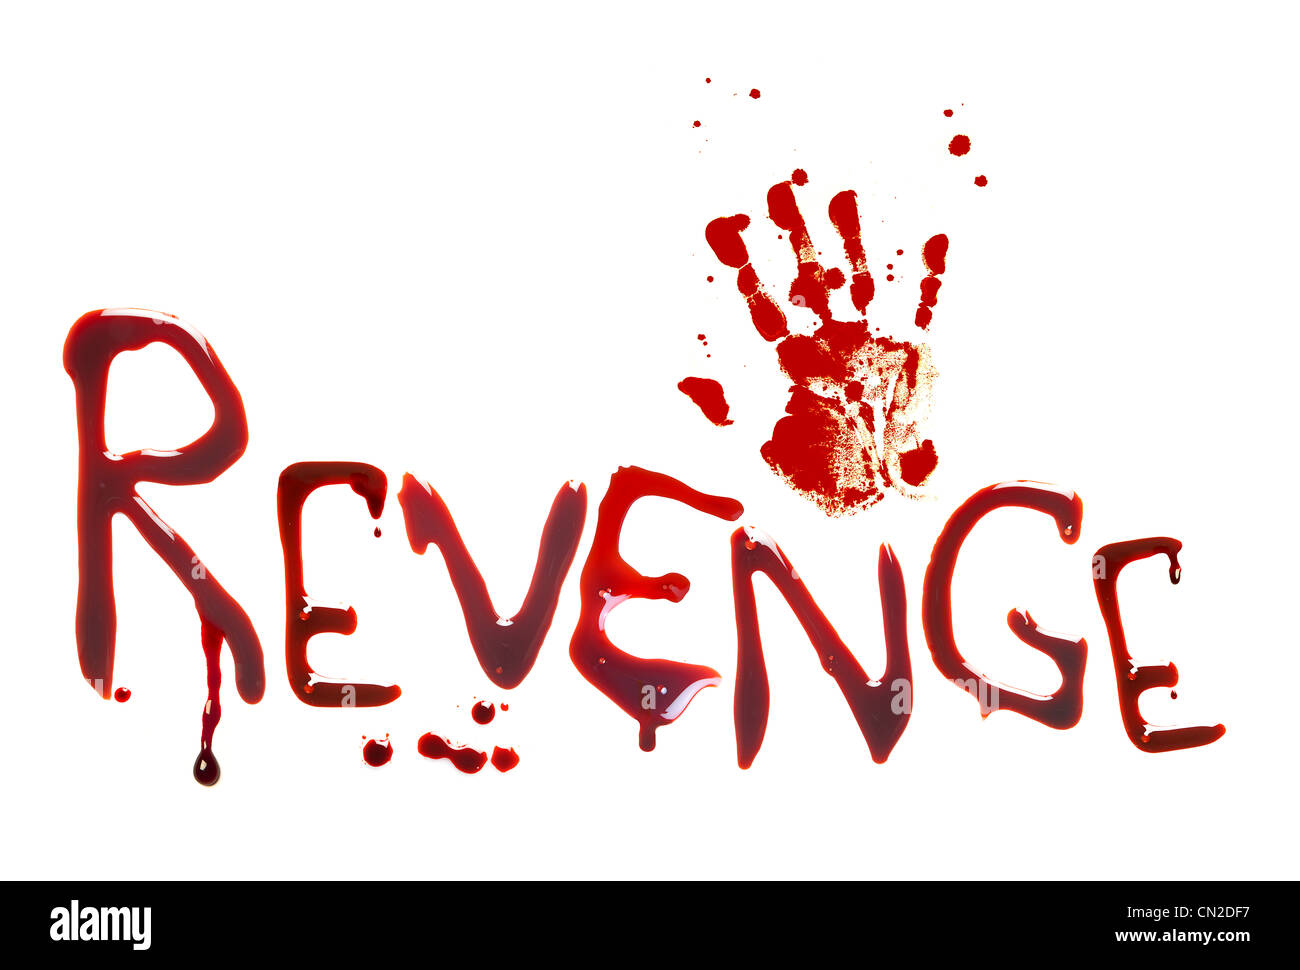 Bloody letters and a hand-print showing revenge Stock Photo